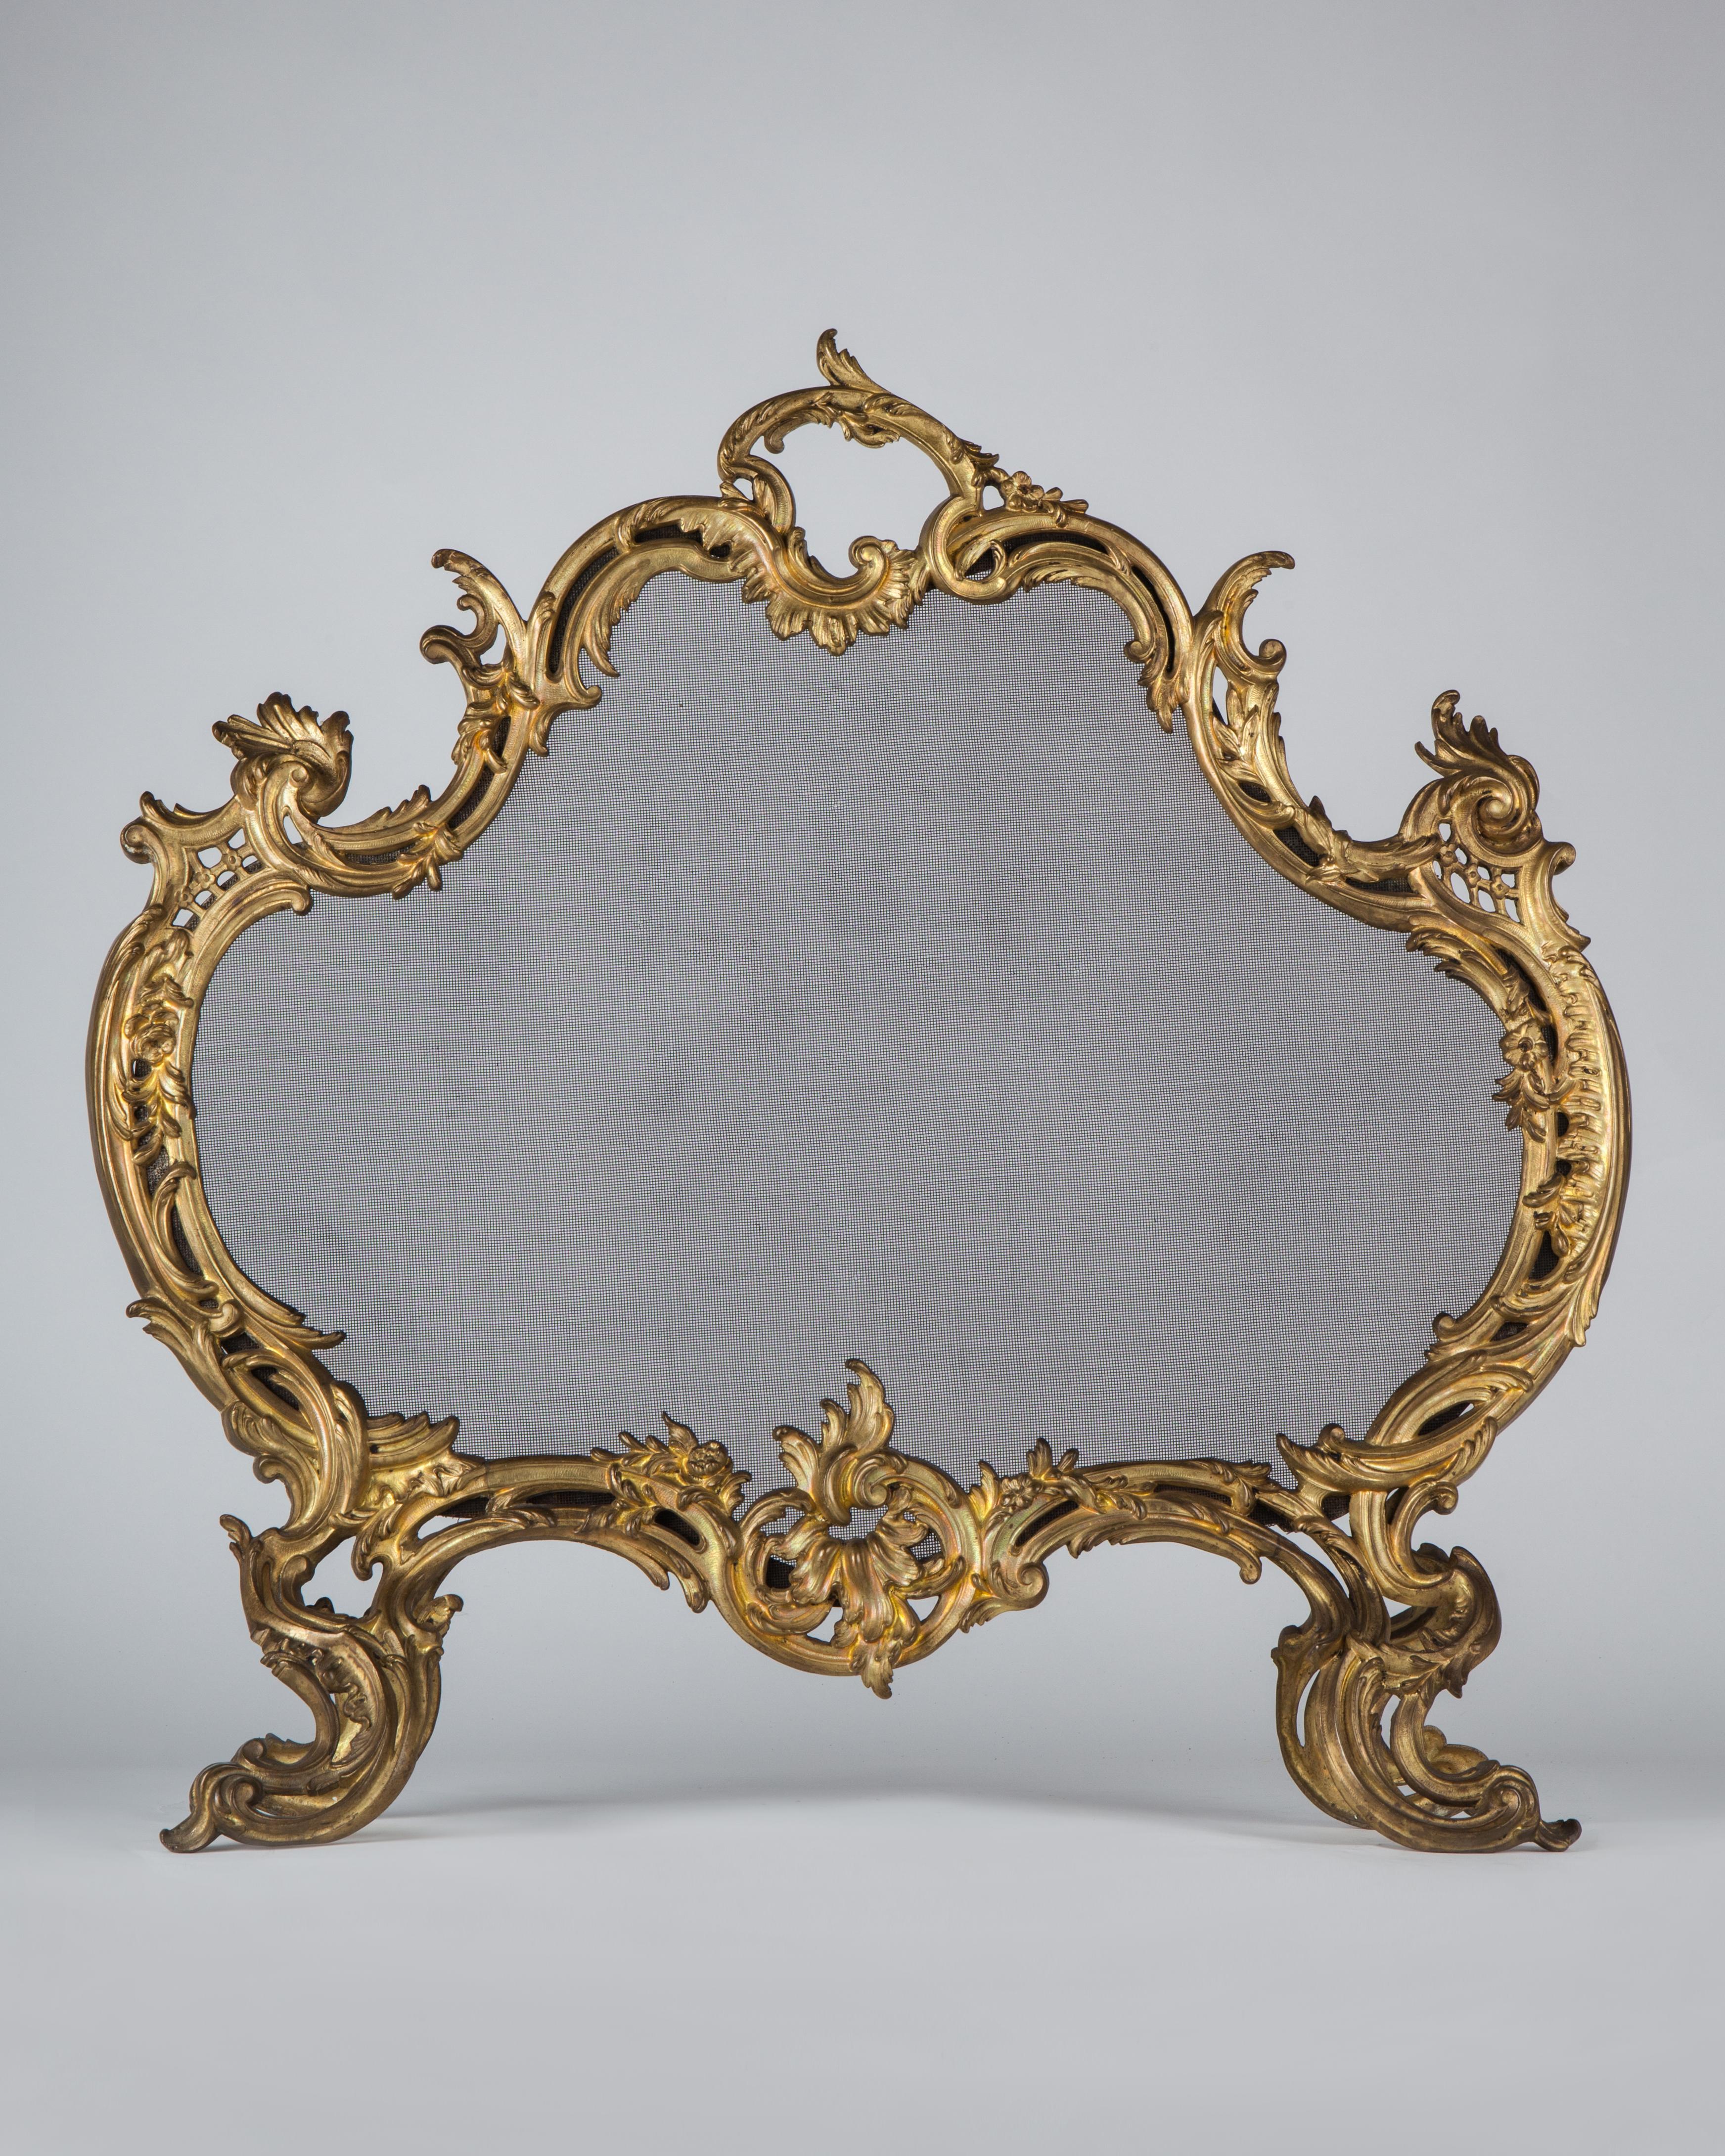 AFP0555
A Louis XV style bronze fireplace screen, with finely chased detail to the foliate scrolls, in its original ormolu finish.

Dimensions:
Overall: 28-1/2